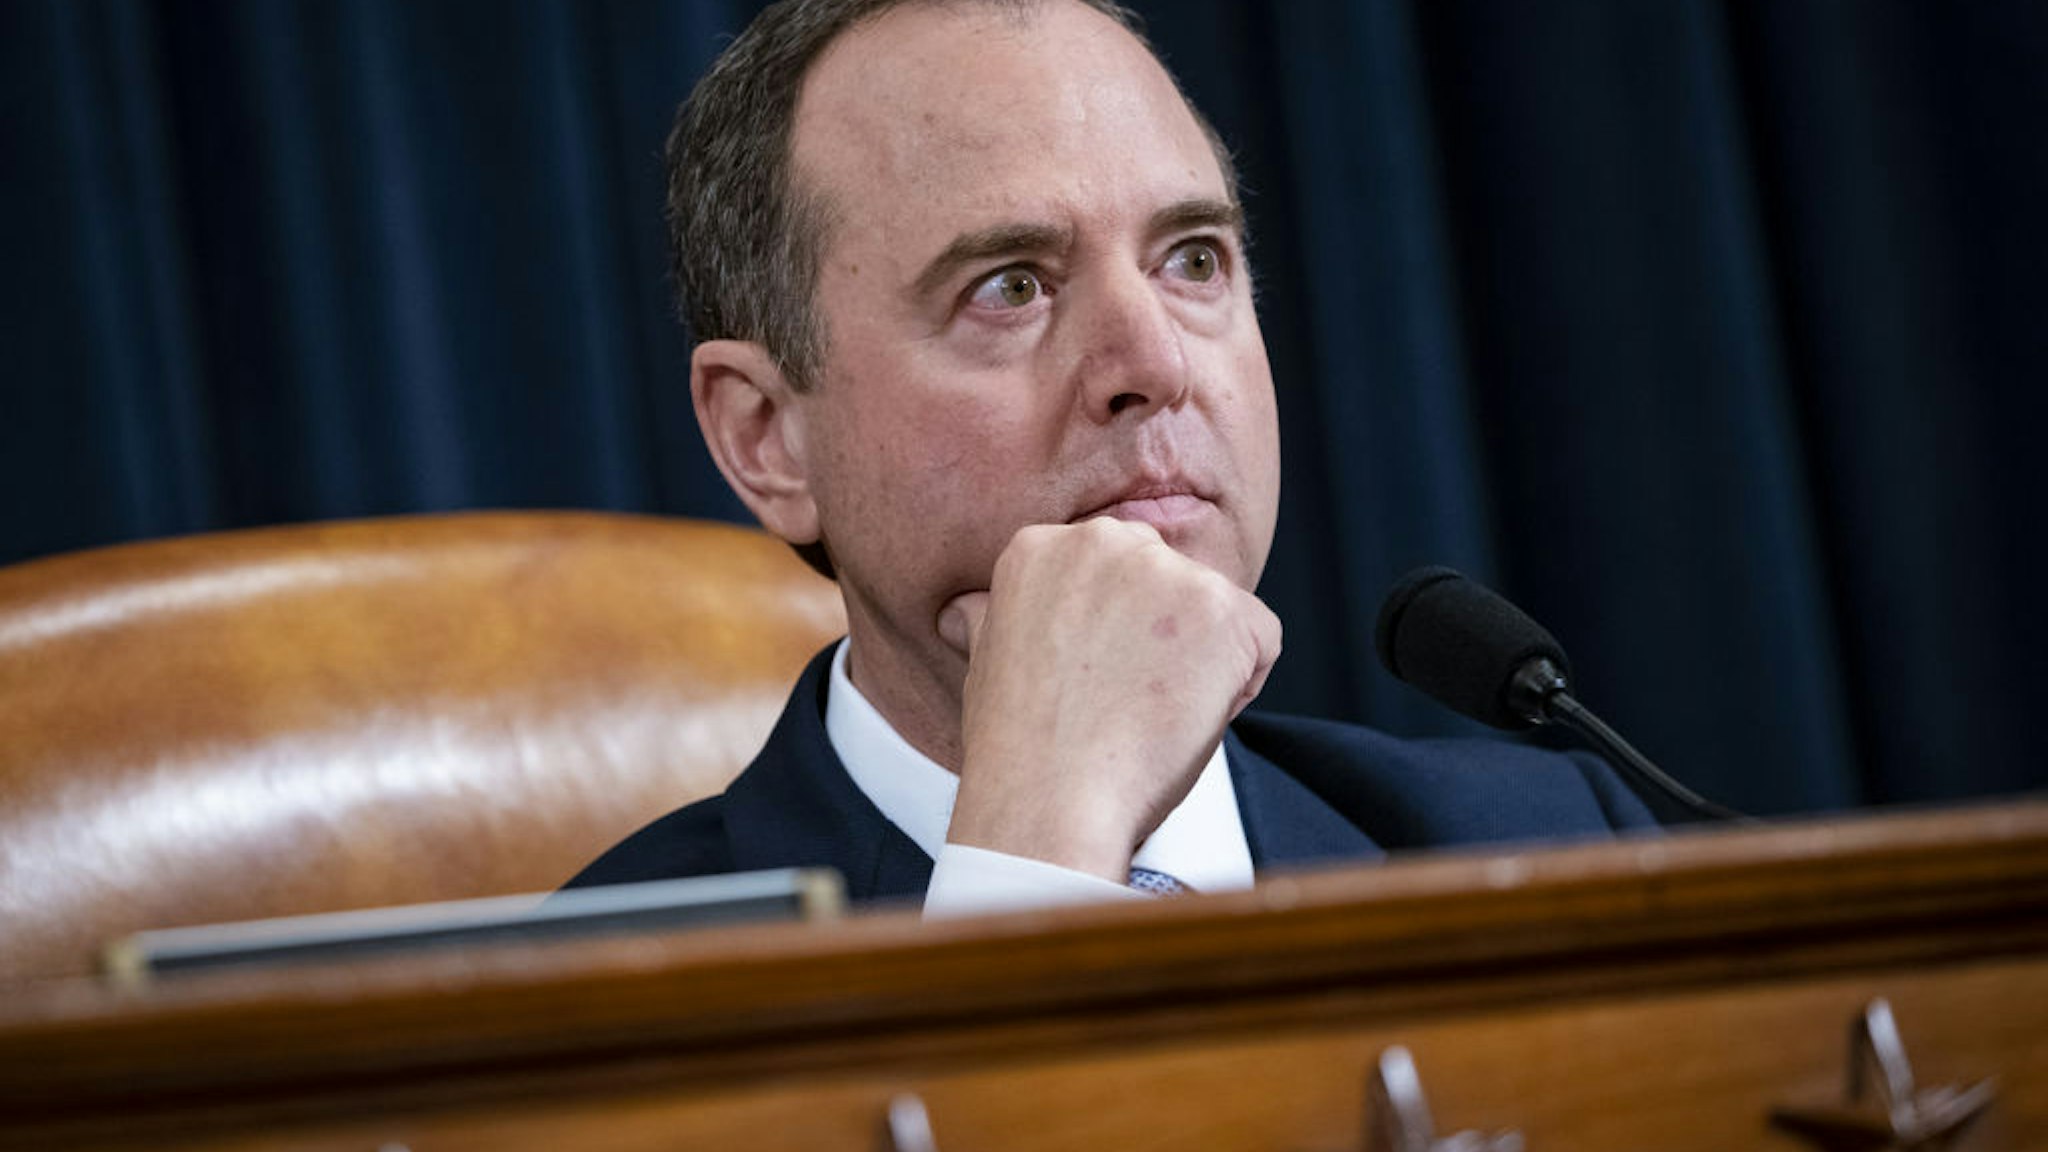 Representative Adam Schiff, a Democrat from California and chairman of the House Intelligence Committee, listens during an impeachment inquiry hearing with Marie Yovanovitch, former U.S. Ambassador to Ukraine, in Washington, D.C., U.S., on Friday, Nov. 15, 2019.